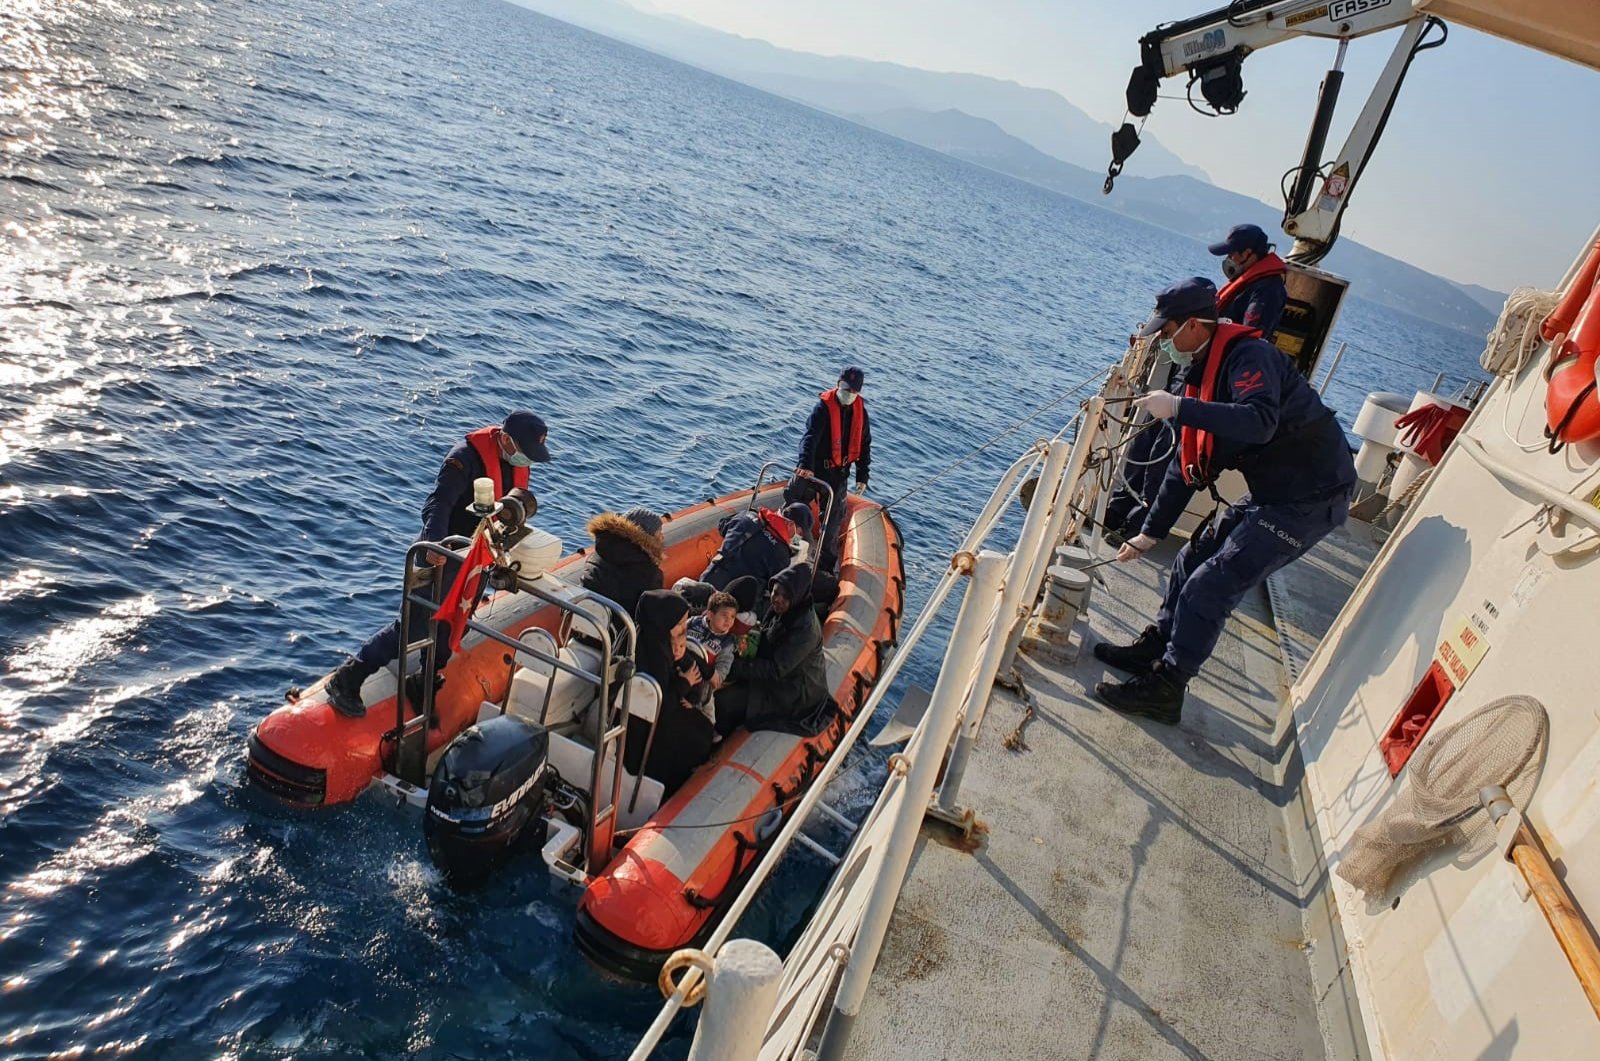 Ten Congolese, eight Syrians, six from the Central African Republic and two Afghans, including children were rescued from a rubber boat off the coast of Kuşadası district in western Aydın province, Thursday, April 2, 2020. (AA)